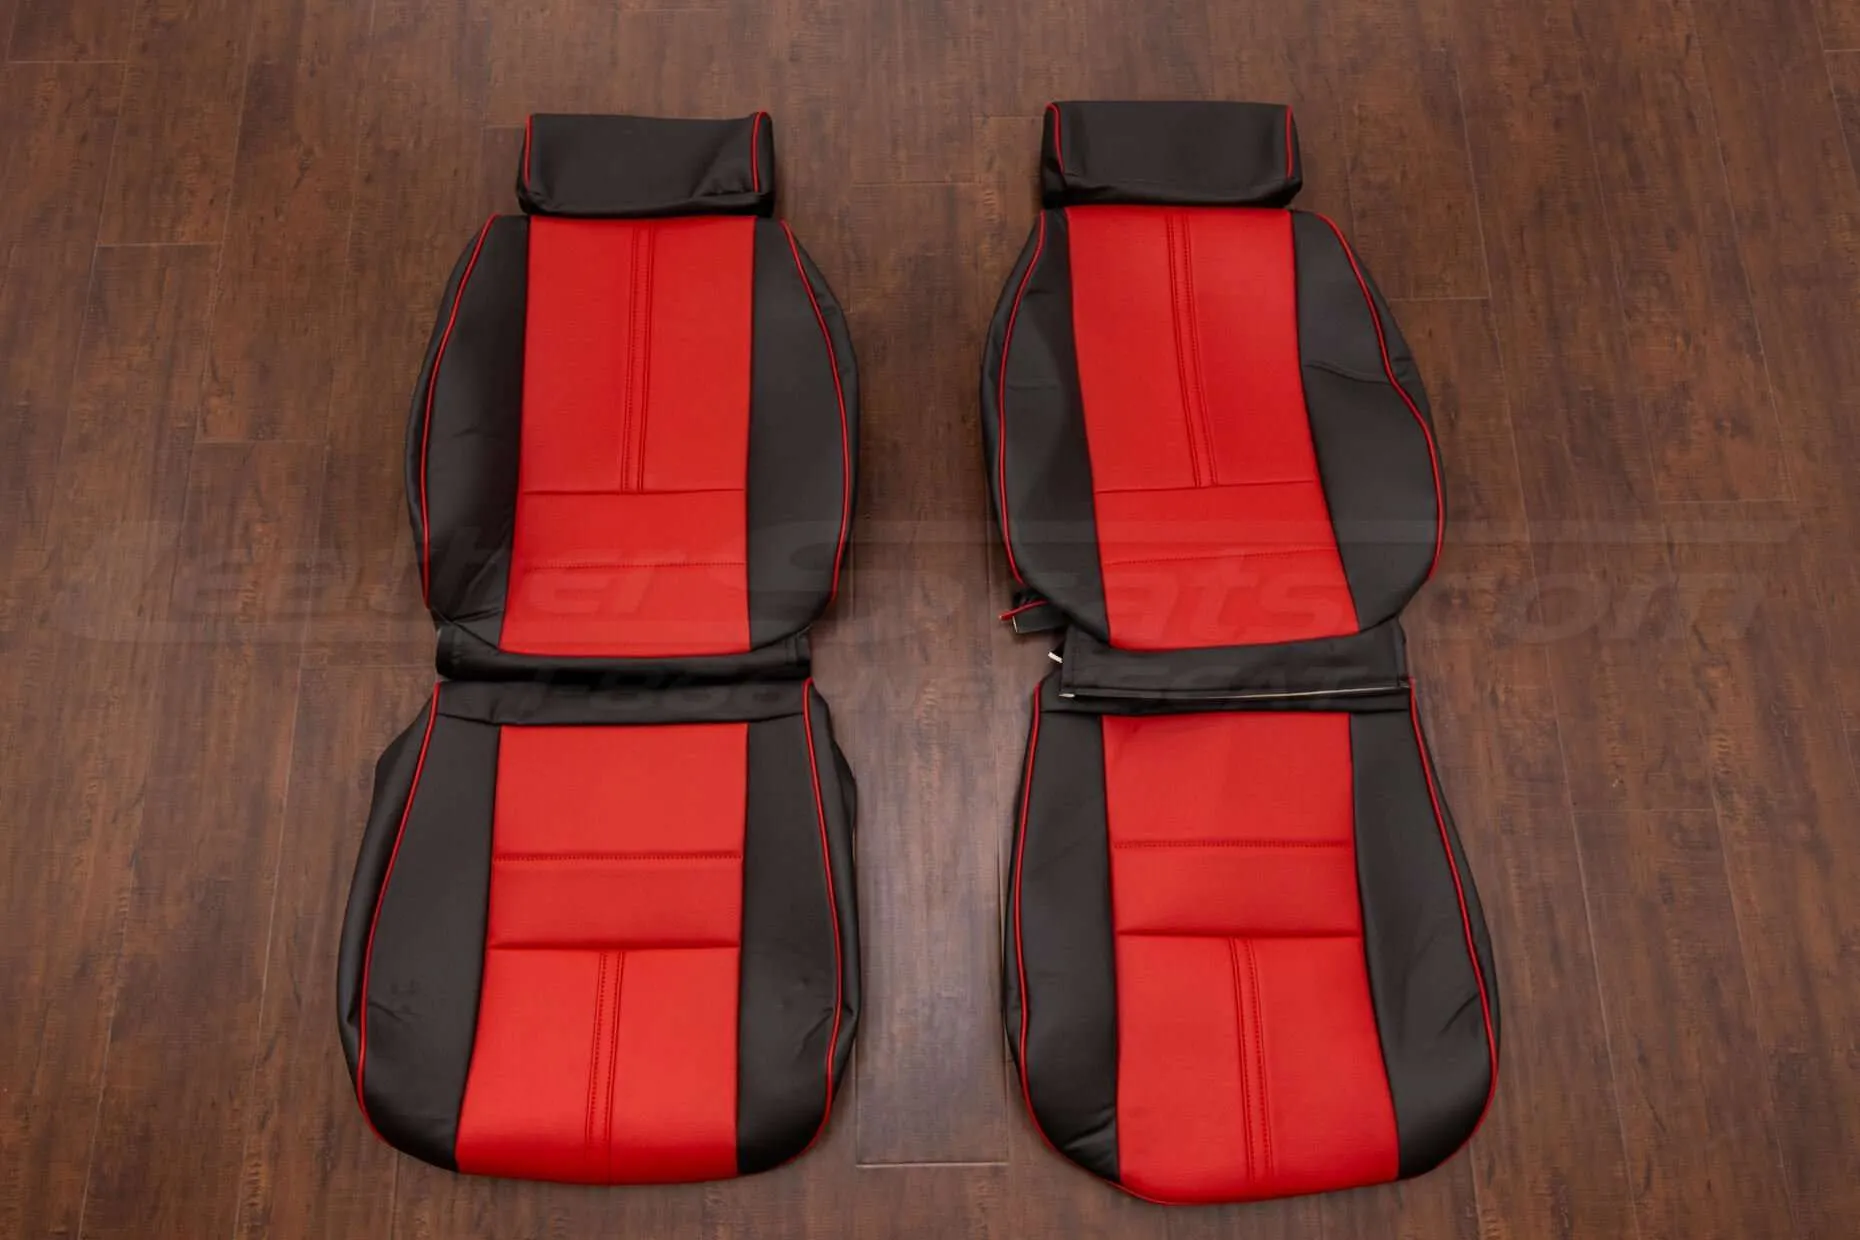 88-92 Chevrolet Camaro Upholstery Kit - Black & Bright Red - Front Seat Upholstery